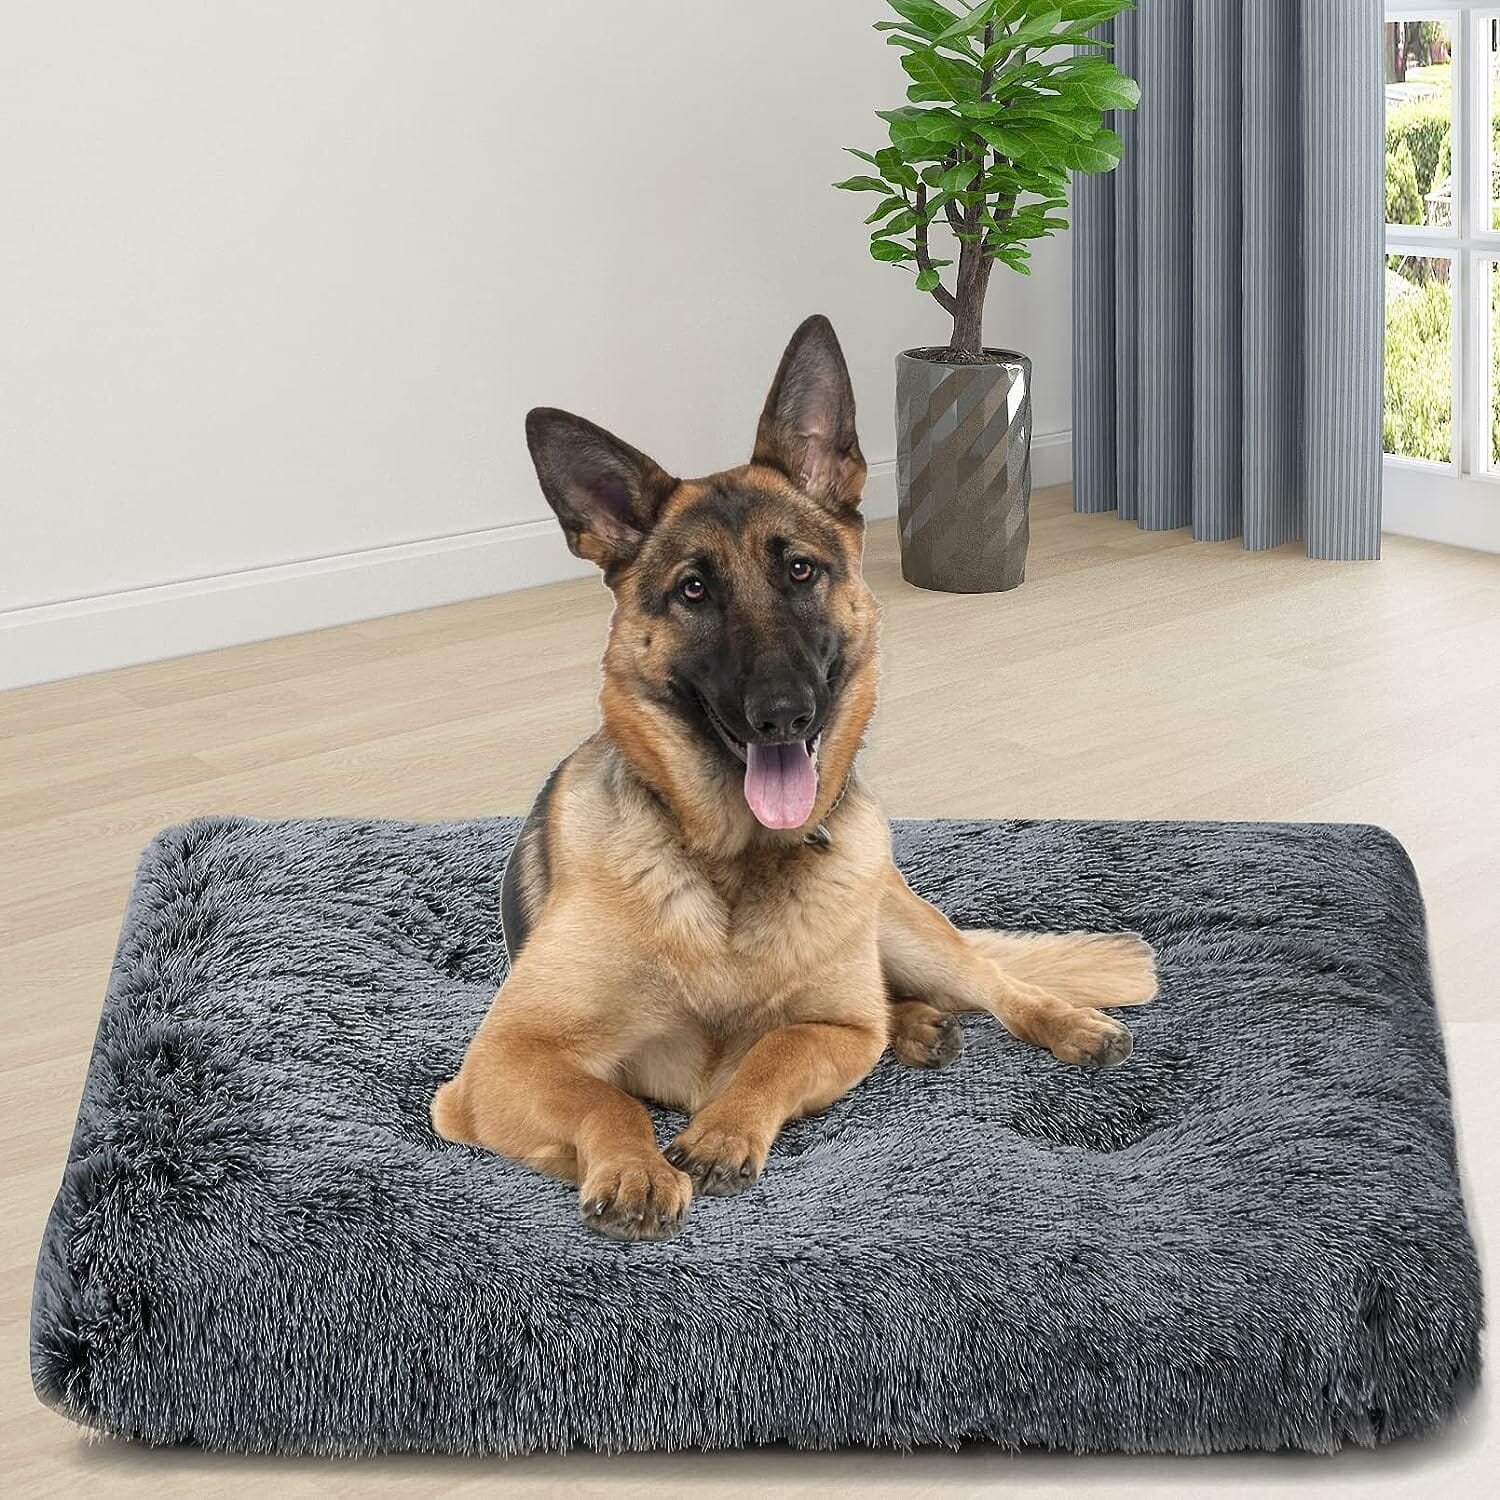 Crate Pet Bed Review